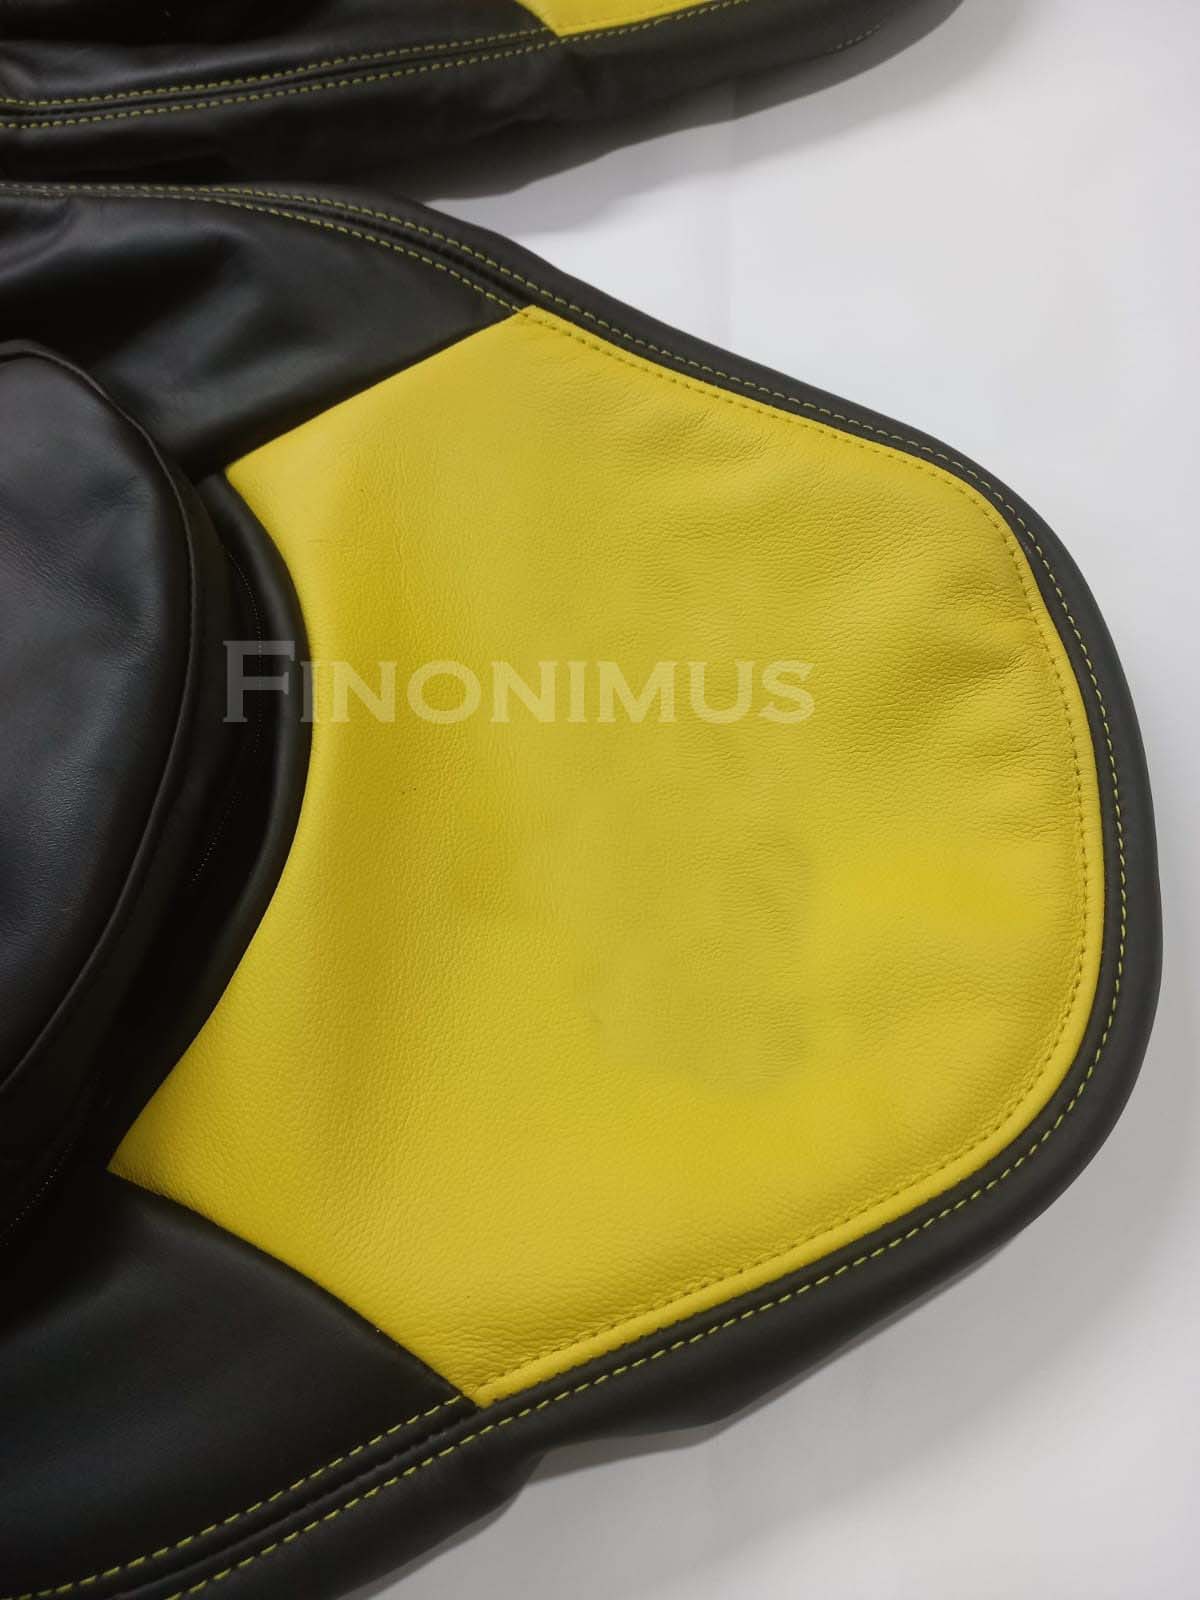 C5 Corvette Sports seat cover Genuine Leather ; Velocity Yellow / Black (Year 1997 to 2004) - Custom Order with Centre Console.